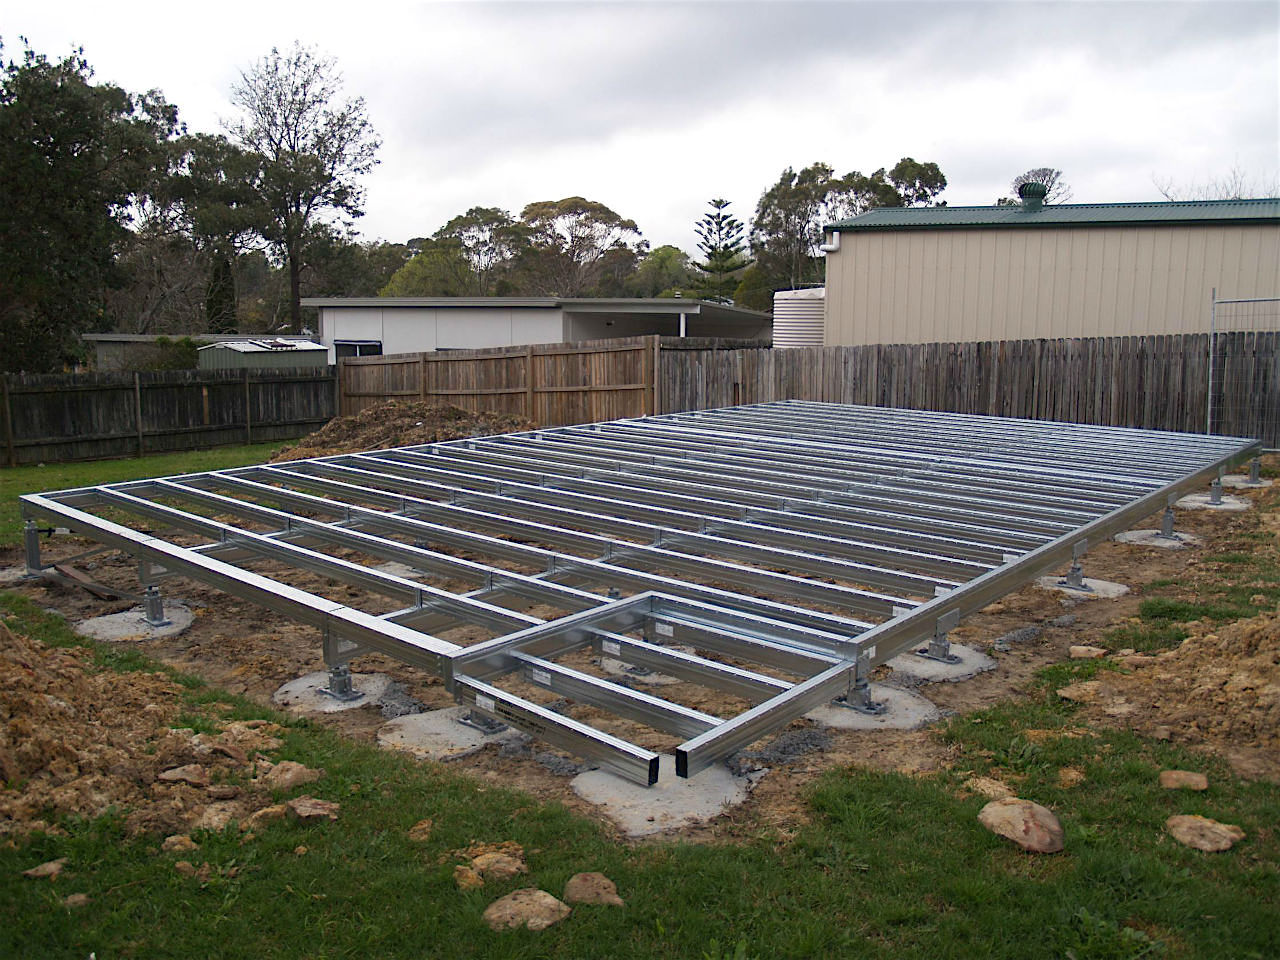 Boxspan steel bearers and joists floor frame for a granny flat in a suburban backyard